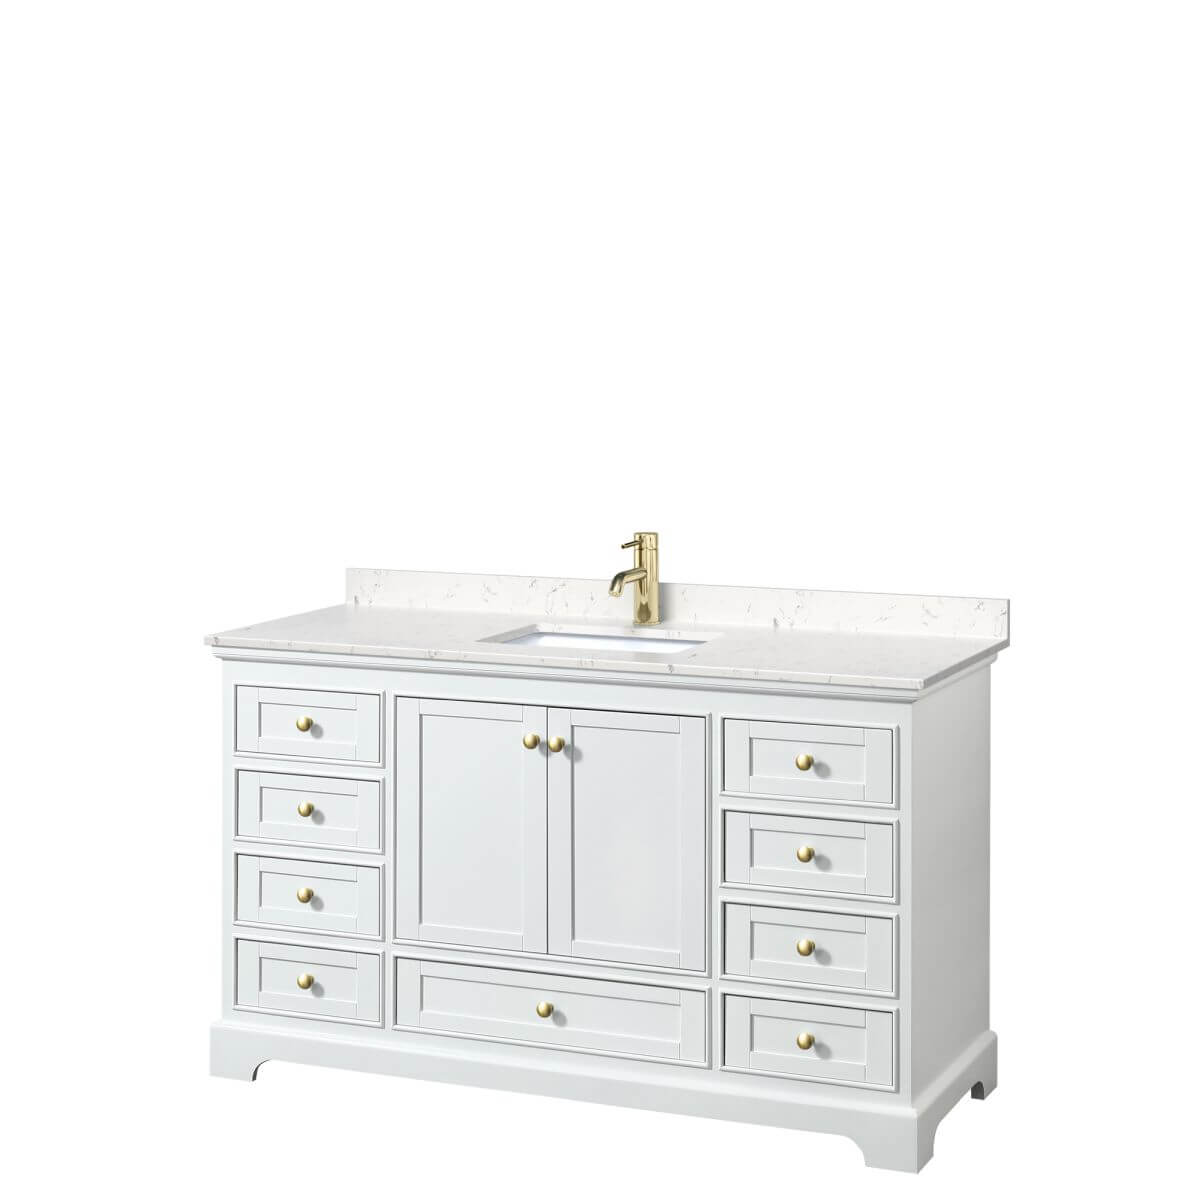 Wyndham Collection Deborah 60 inch Single Bathroom Vanity in White with Carrara Cultured Marble Countertop, Undermount Square Sink, Brushed Gold Trim and No Mirror - WCS202060SWGC2UNSMXX